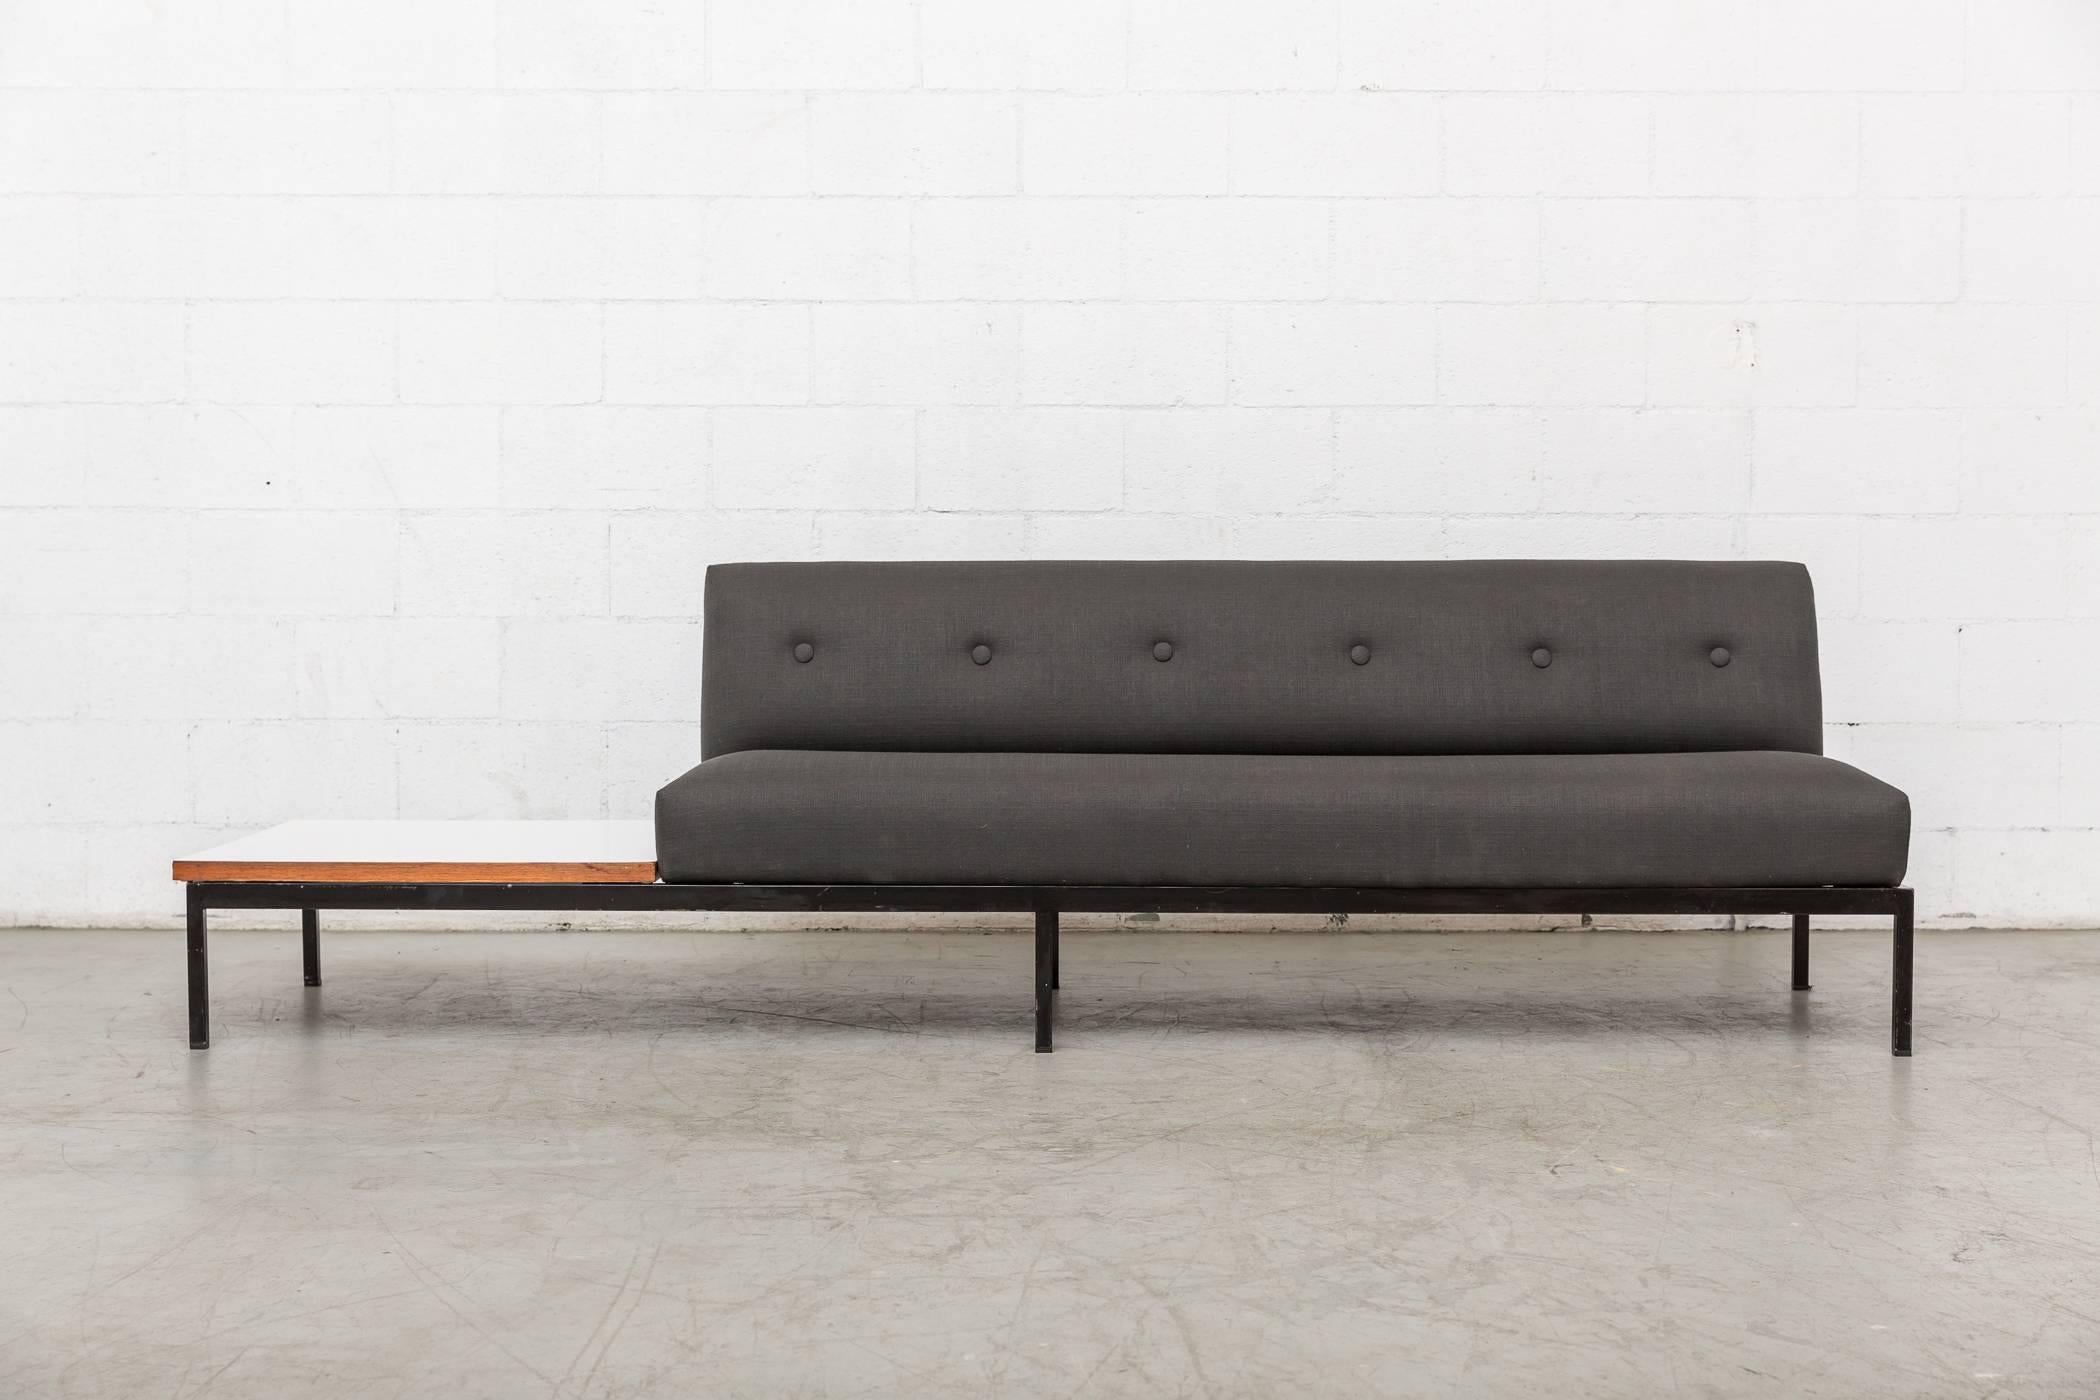 Gorgeous midcentury three-seat Kho Liang Ie sofa for artifort with white formica side table with teak border. Newly upholstered in grey fabric with black enameled metal frame. Table and seating can be oriented to either left or right side of sofa.